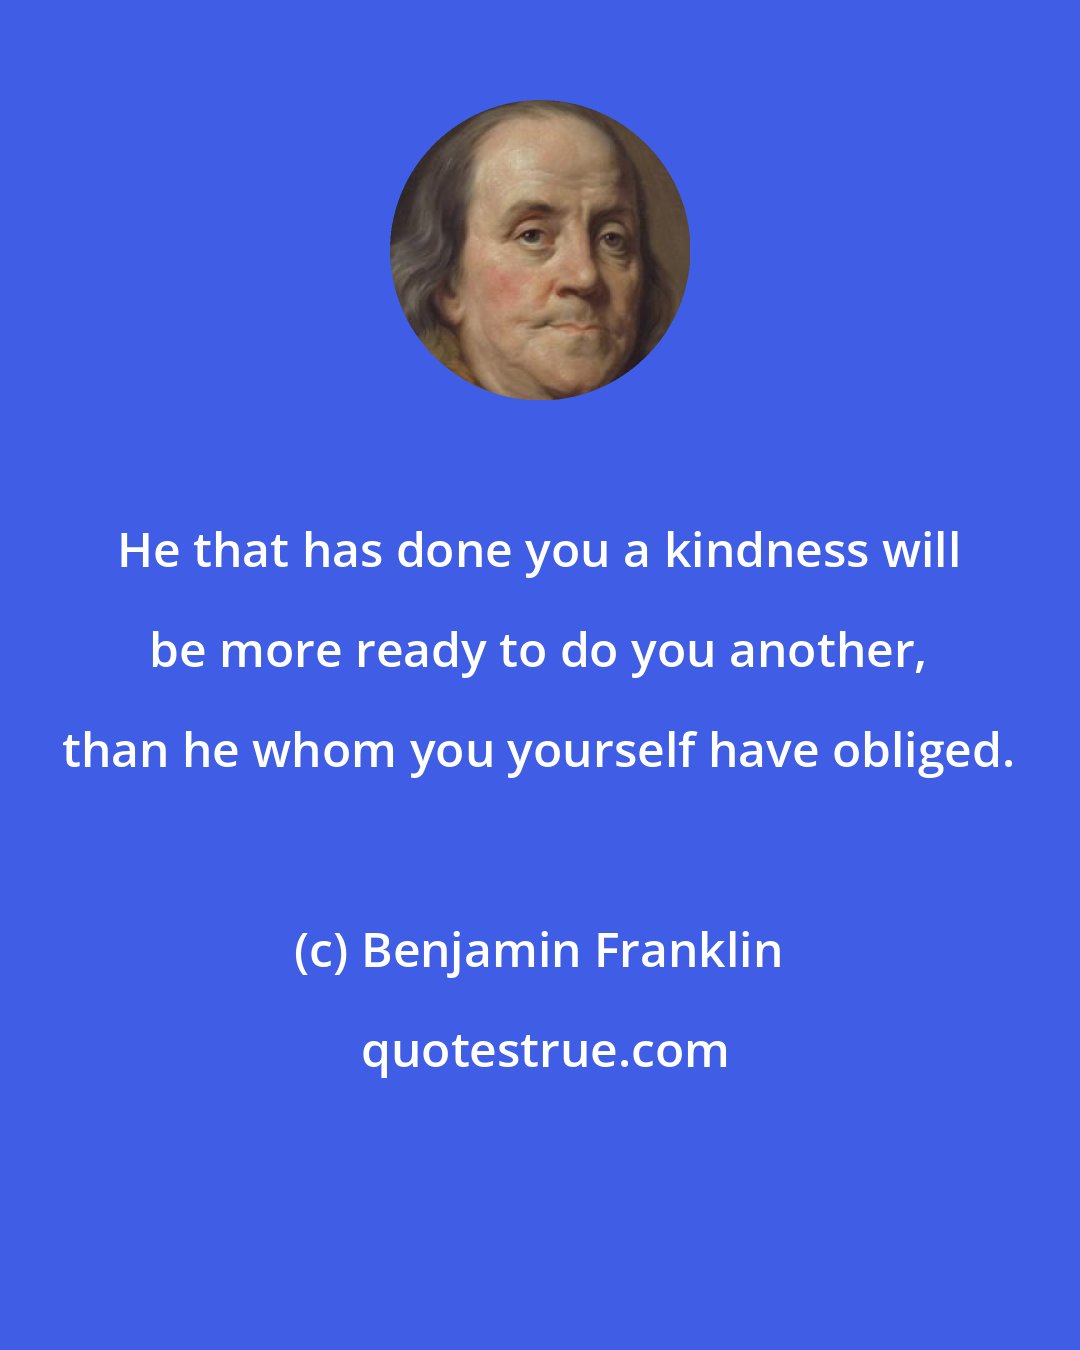 Benjamin Franklin: He that has done you a kindness will be more ready to do you another, than he whom you yourself have obliged.